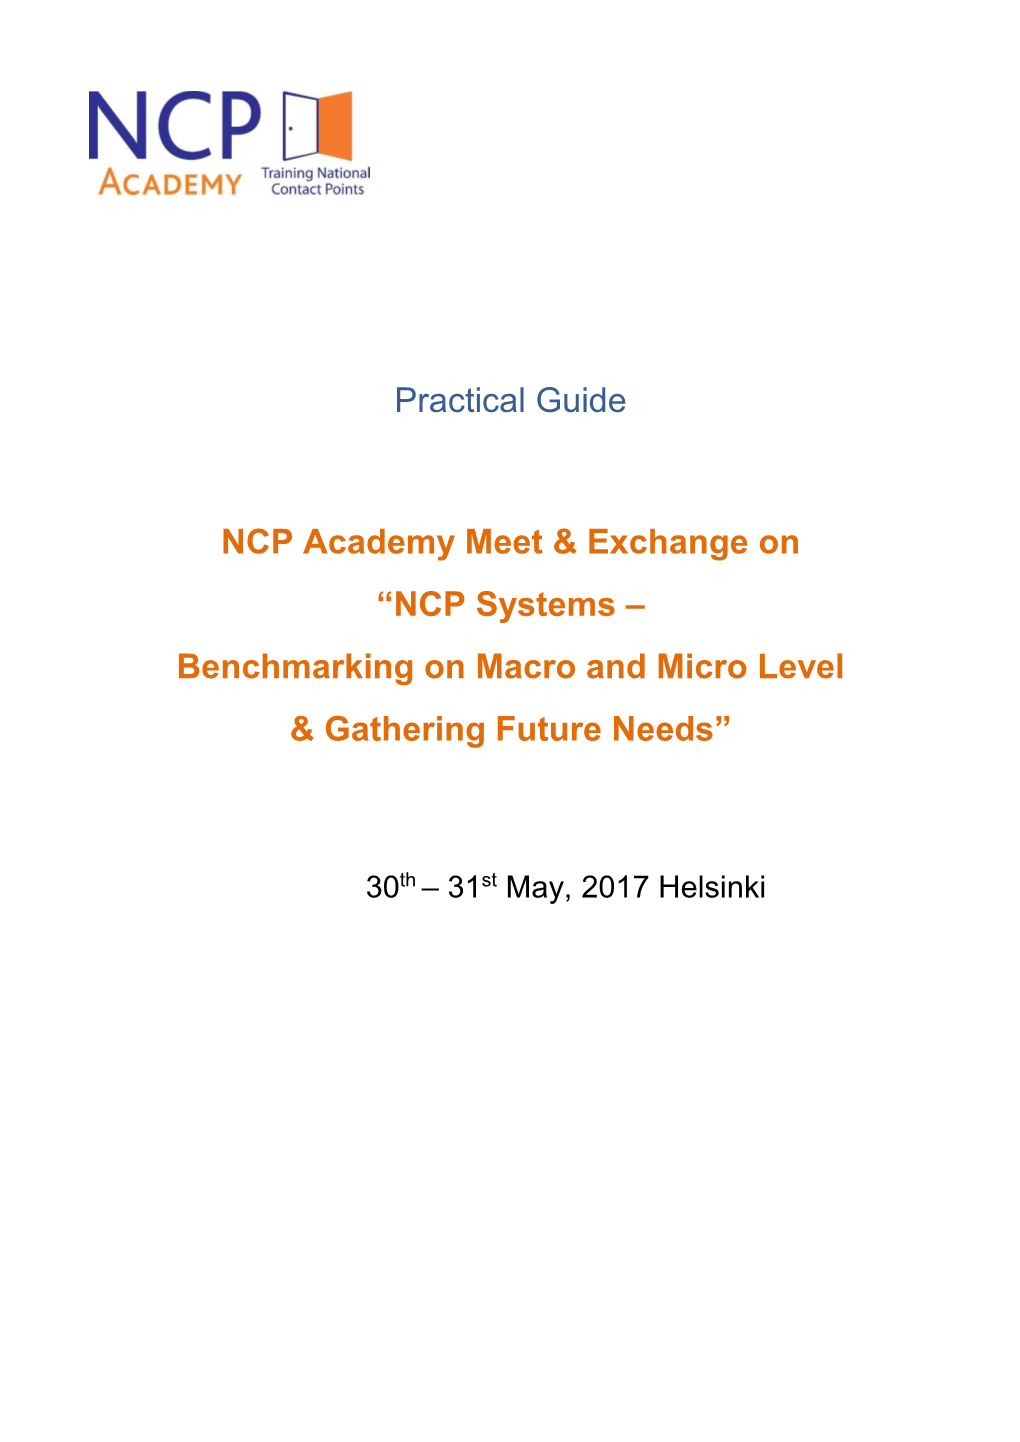 Practical Guide NCP Academy Meet & Exchange on “NCP Systems